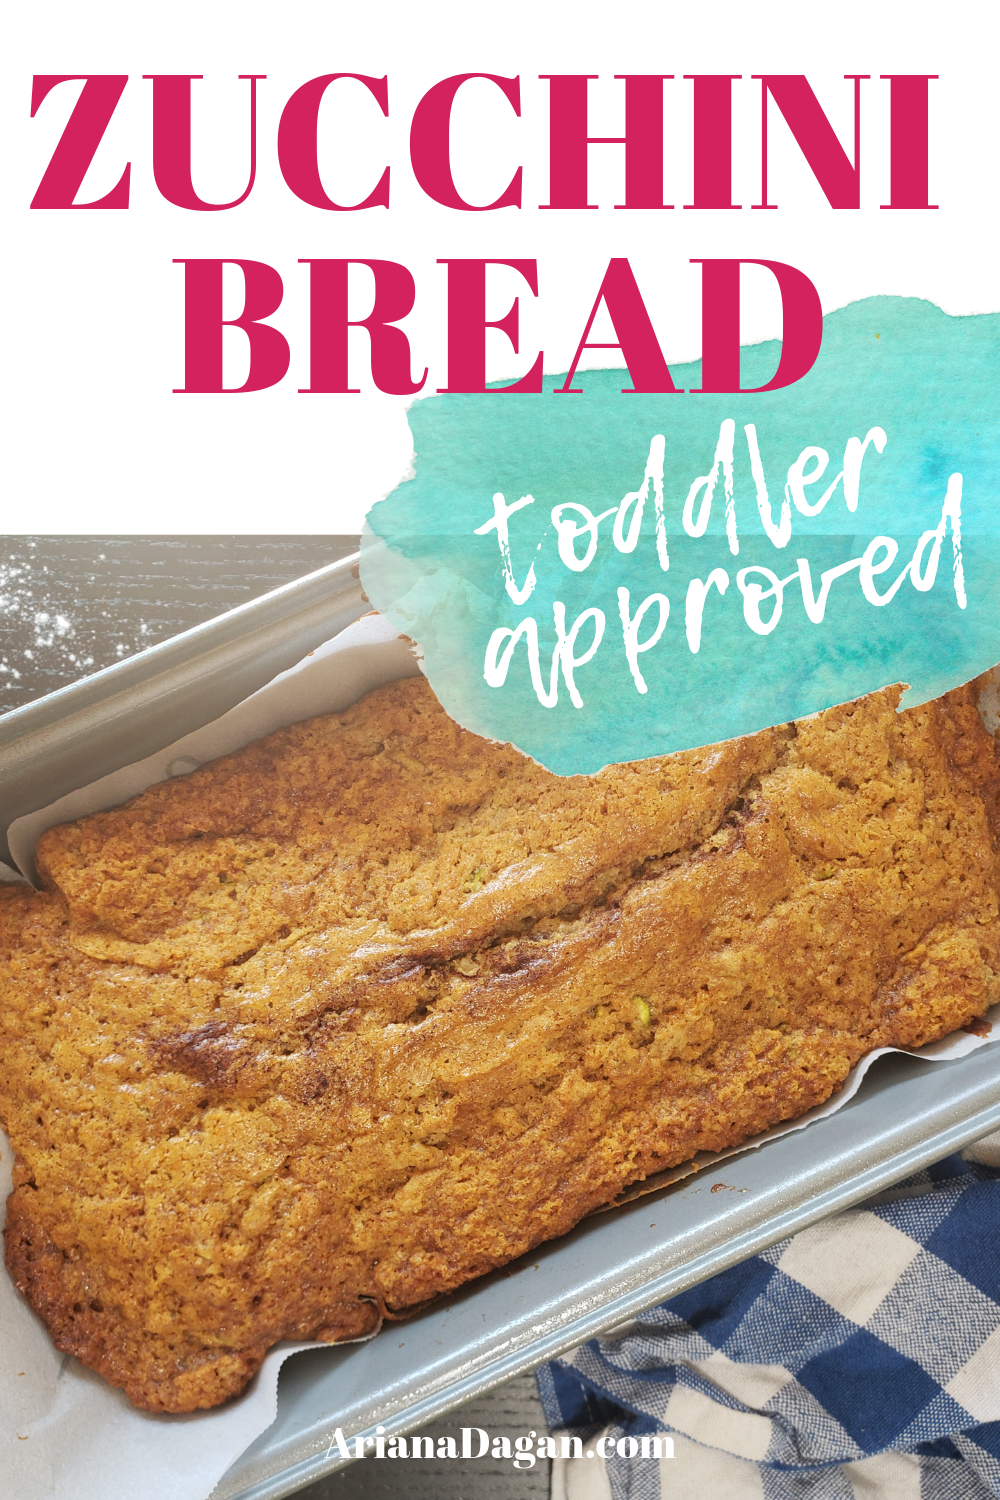 Toddler Approved Zucchini Bread by Ariana Dagan